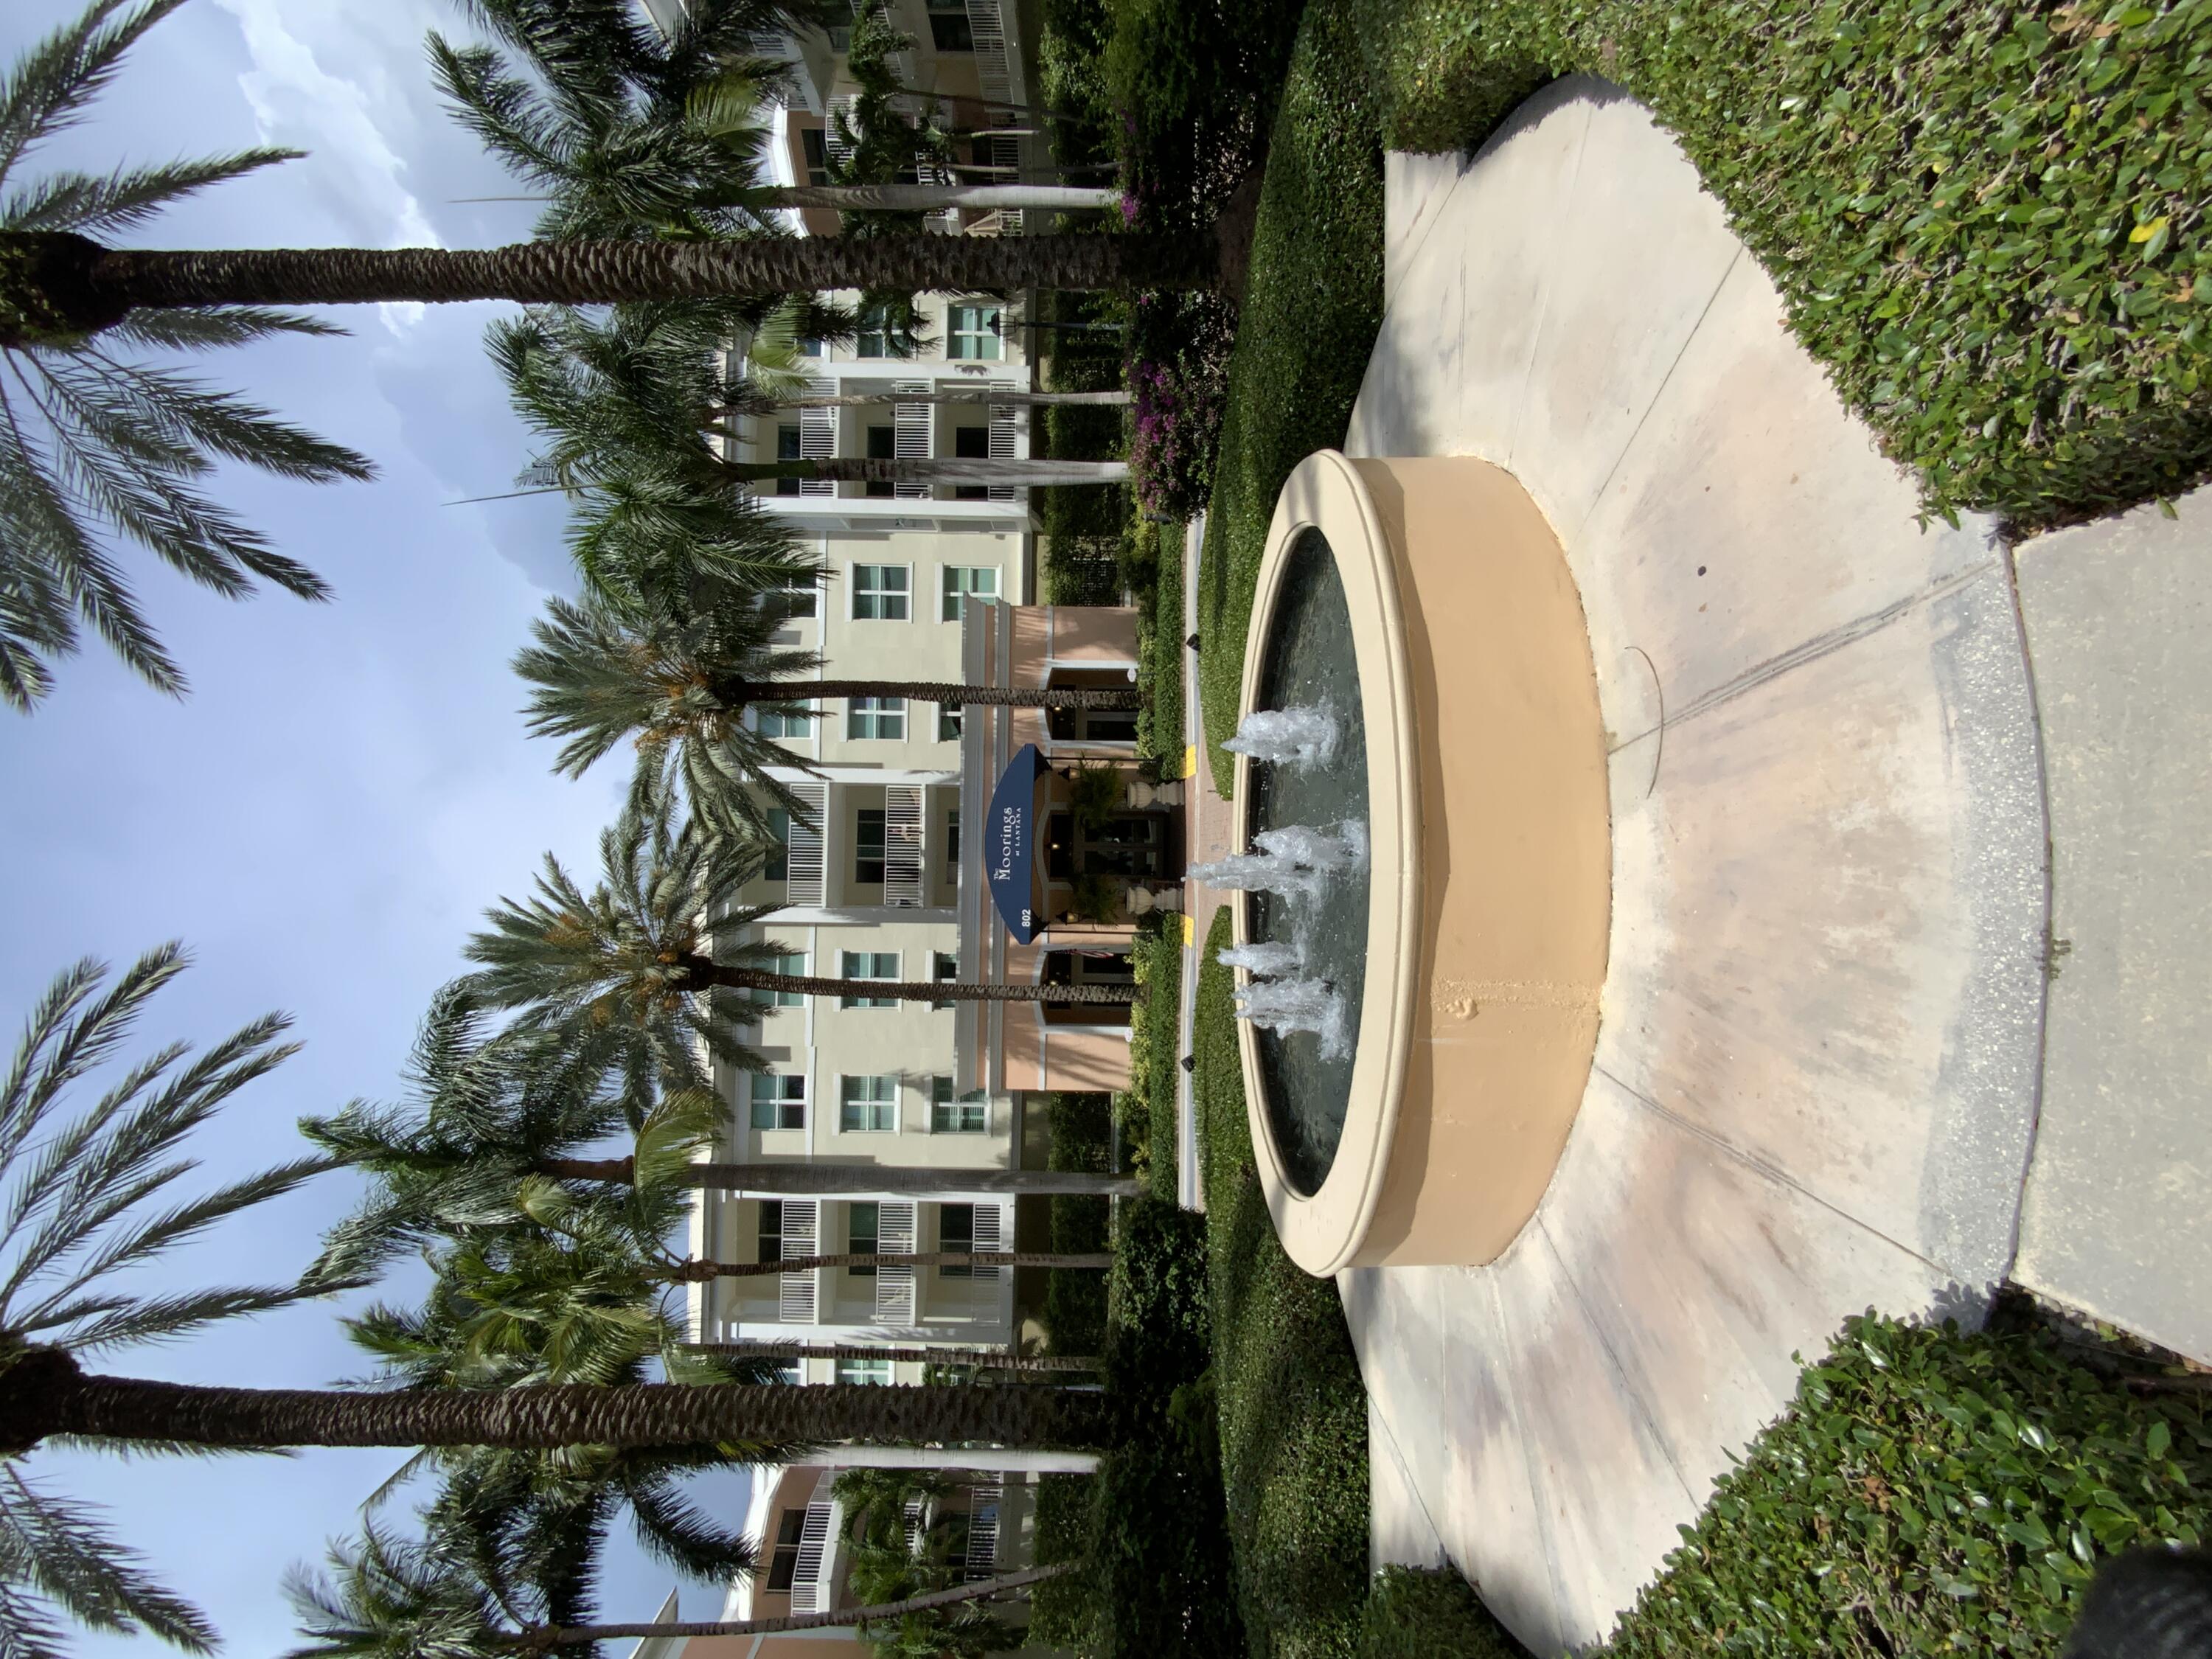 a view of a fountain in front of a house